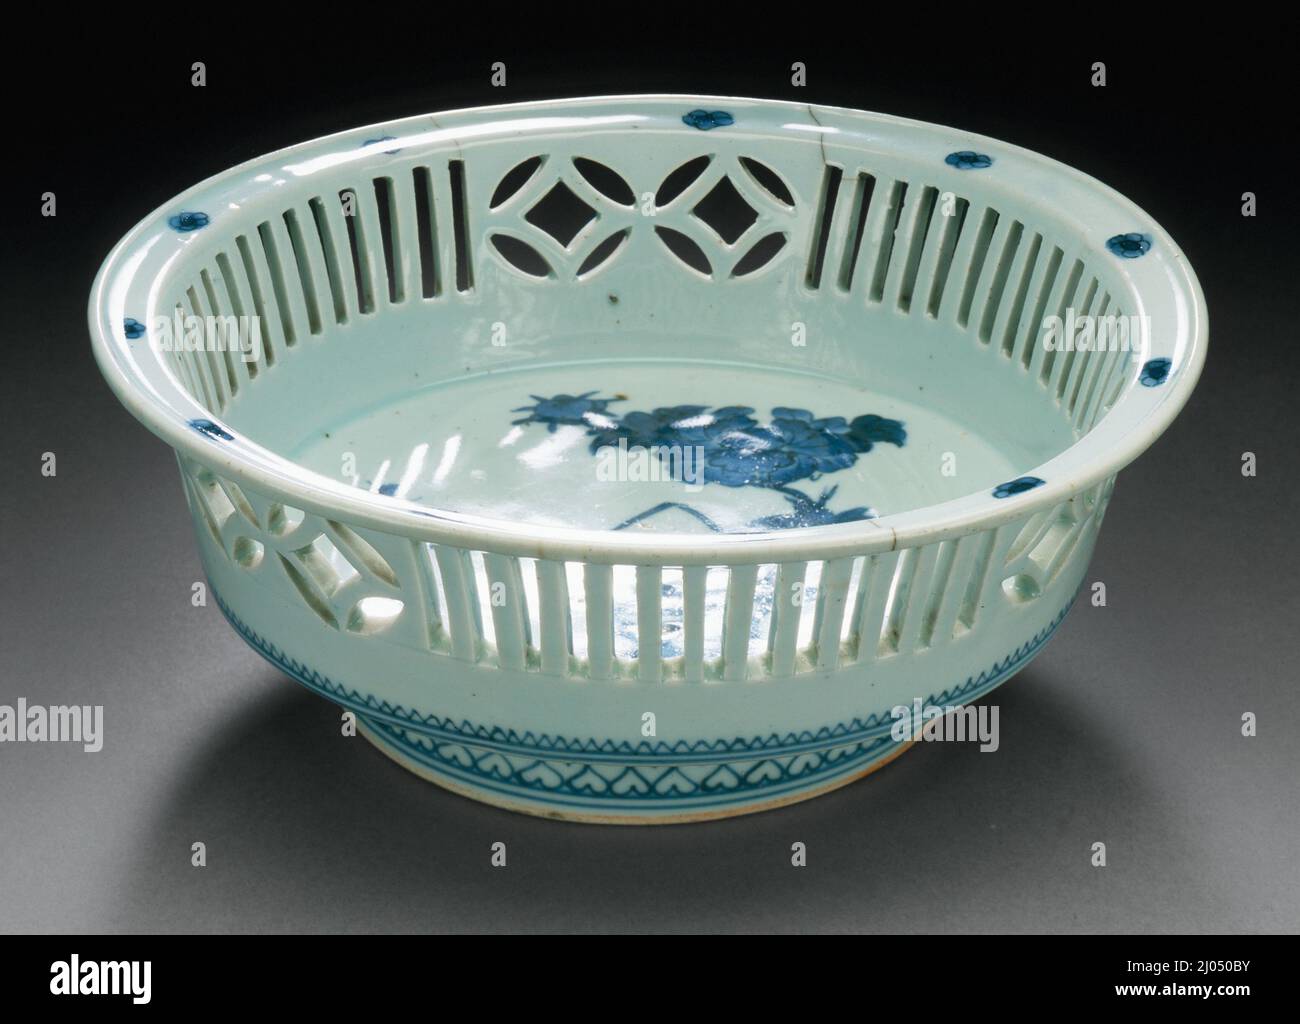 Bowl with Pierced Design. Japan, late 17th - early 18th century. Ceramics. Imari ware; porcelain with blue underglaze Stock Photo